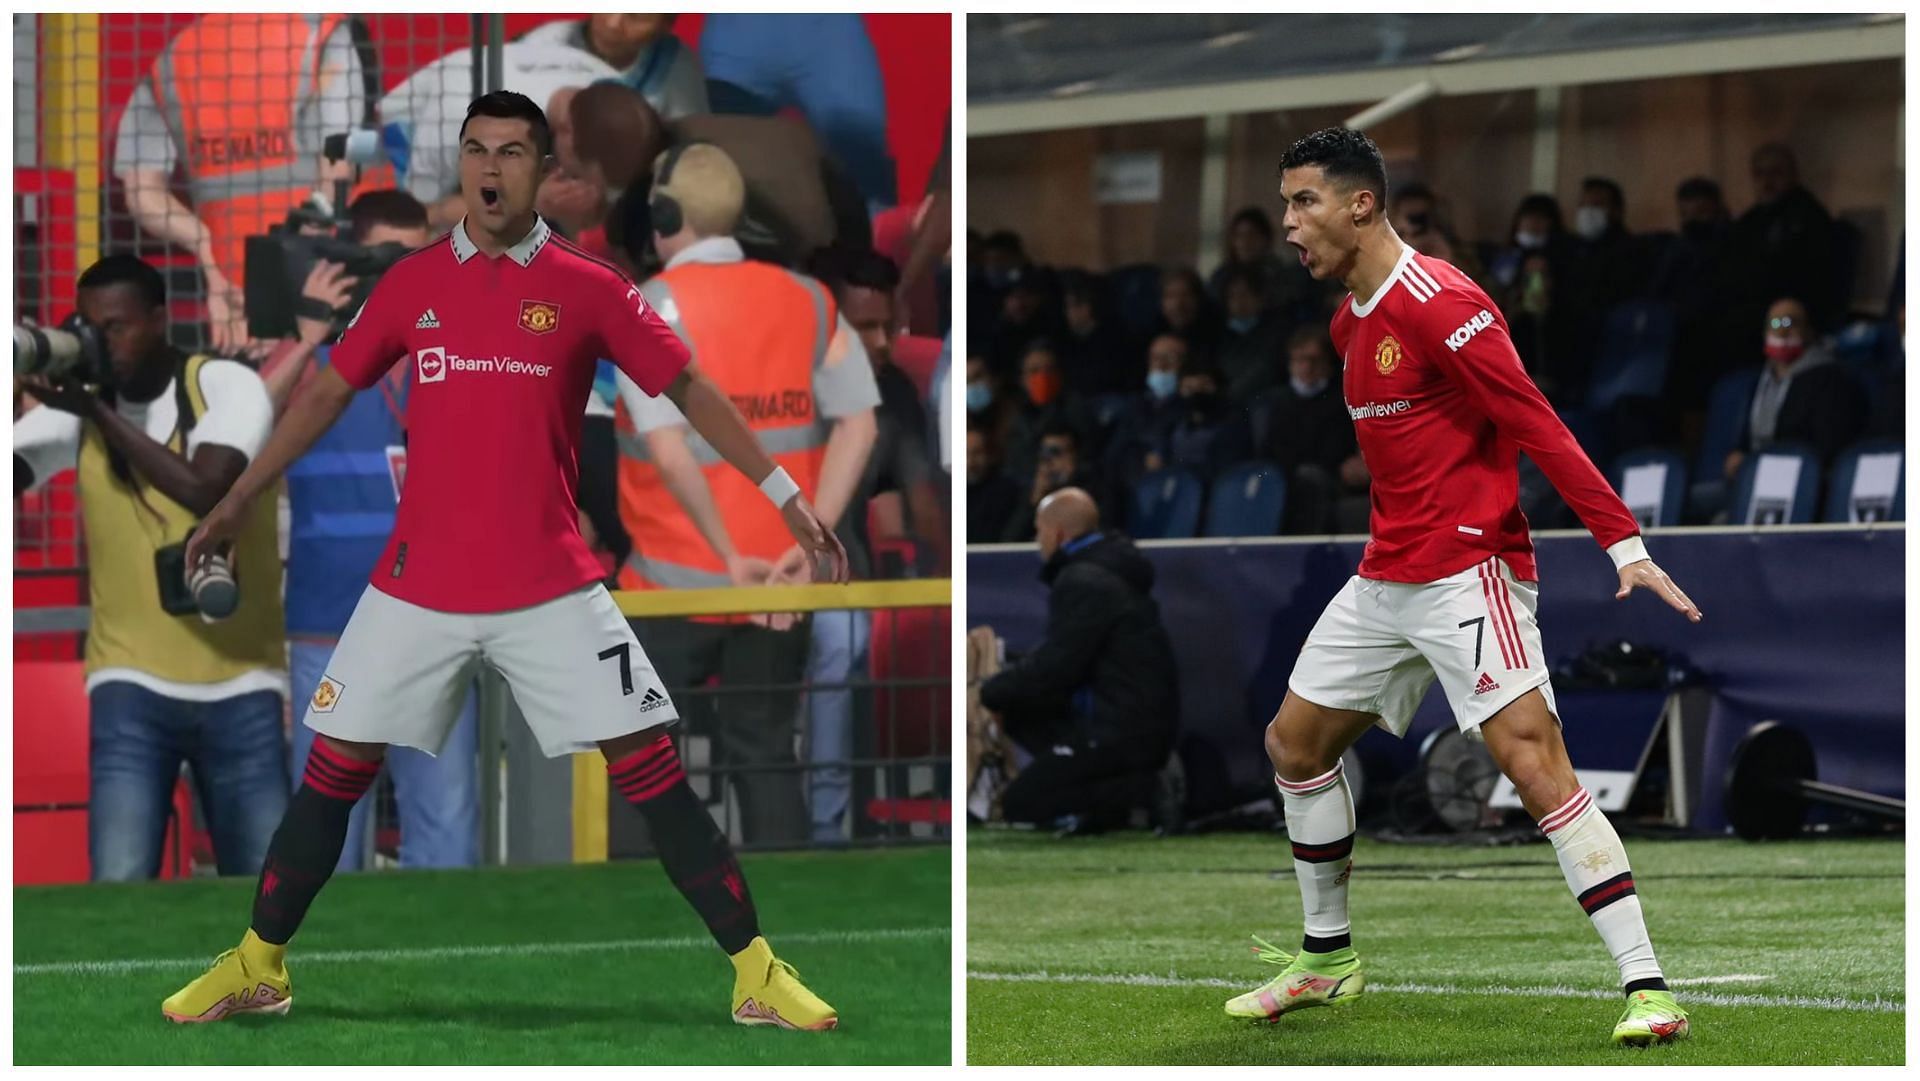 Cristiano Ronaldo has the most iconic celebration in sports (Images via EA Sports and Getty Images)